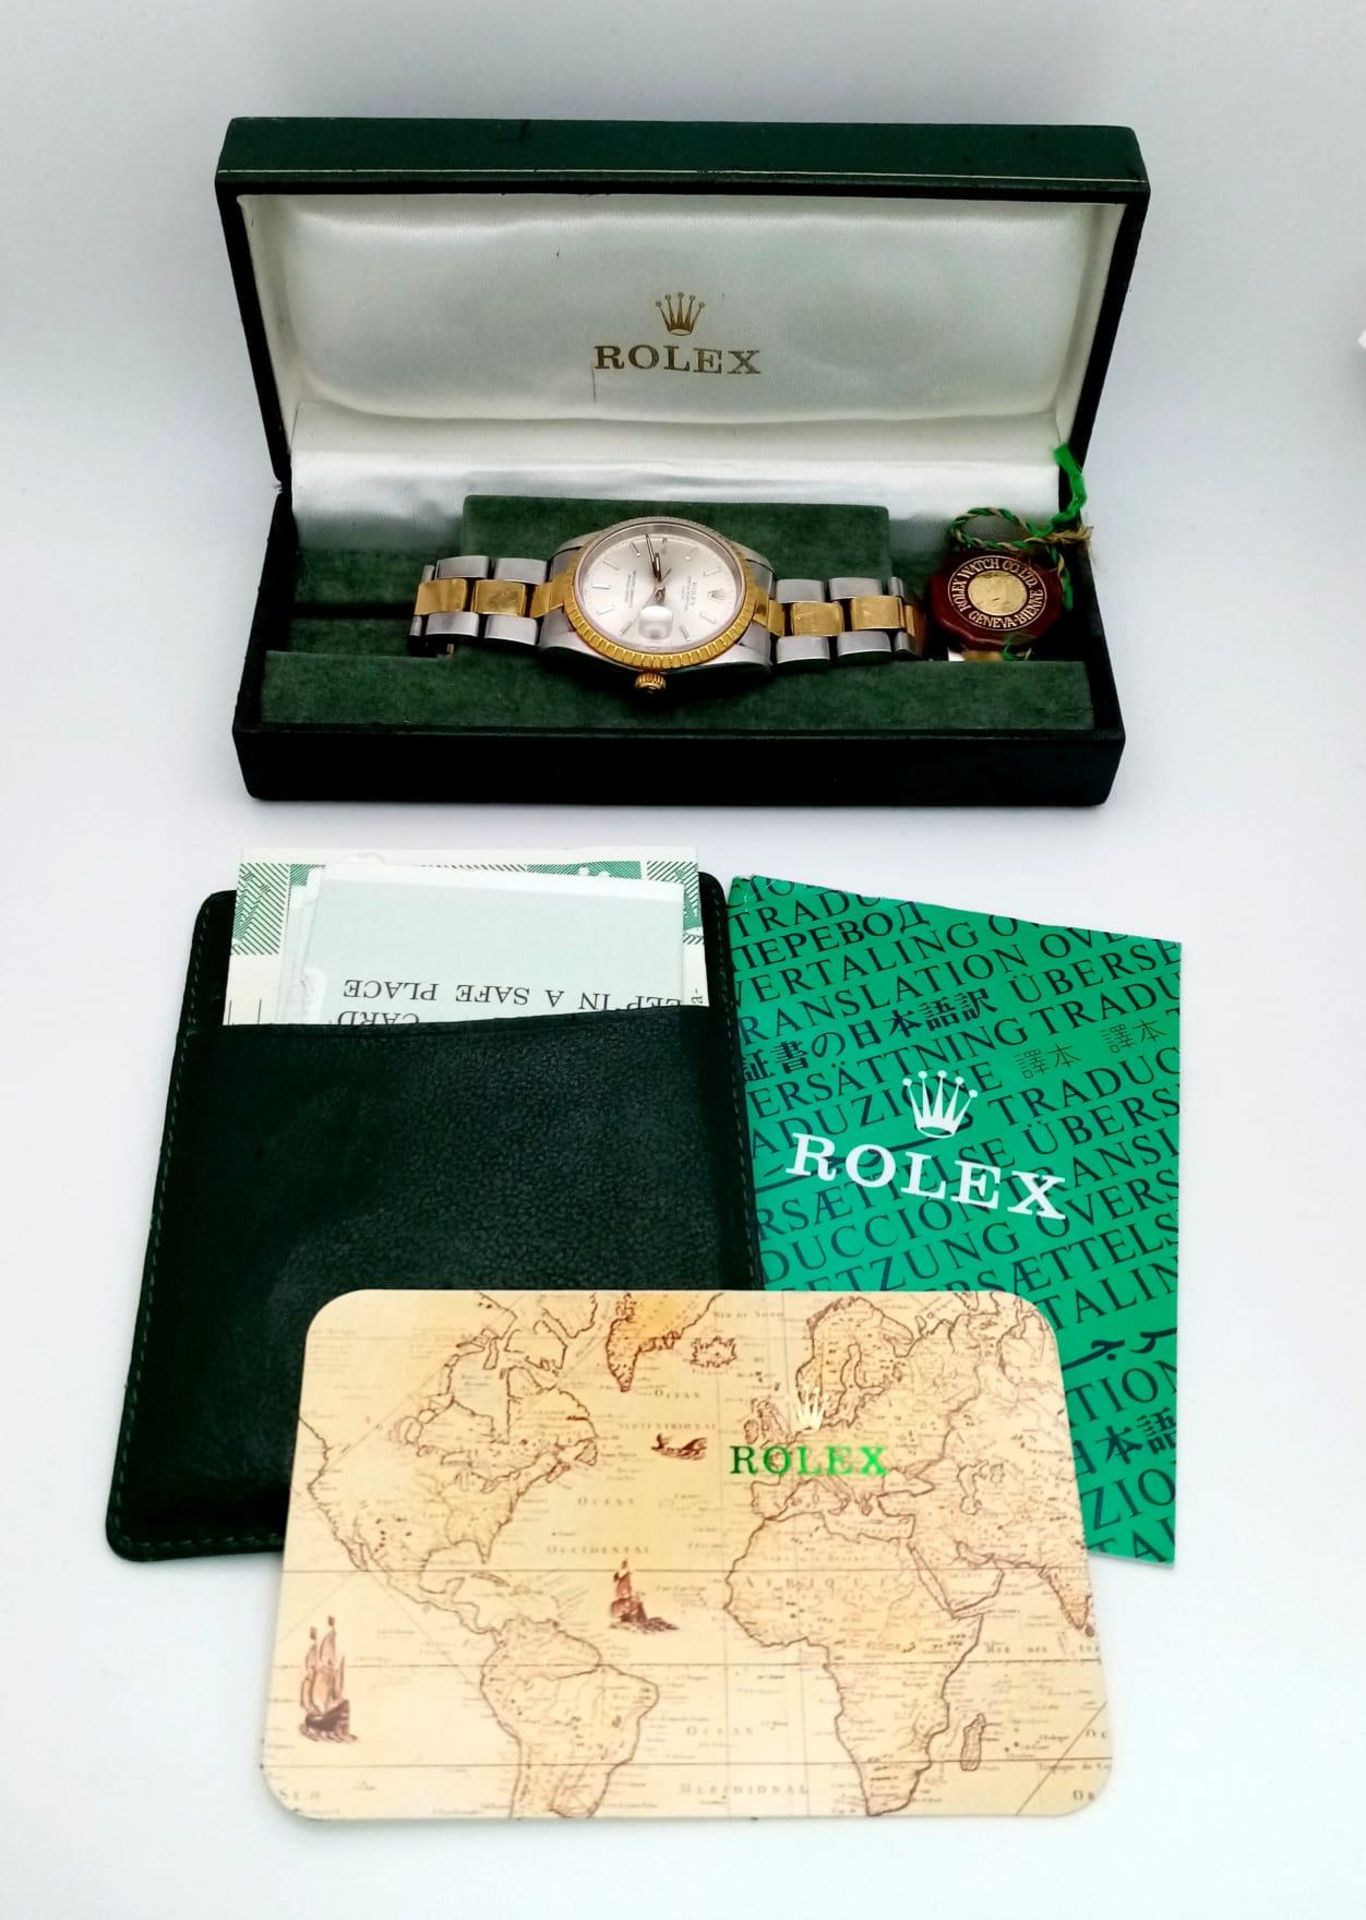 THE CLASSIC ROLEX OYSTER PERPETUAL DATE AUTOMATIC BI-METAL GENTS WATCH WITH TASTEFUL SILVERTONE DIAL - Image 15 of 19